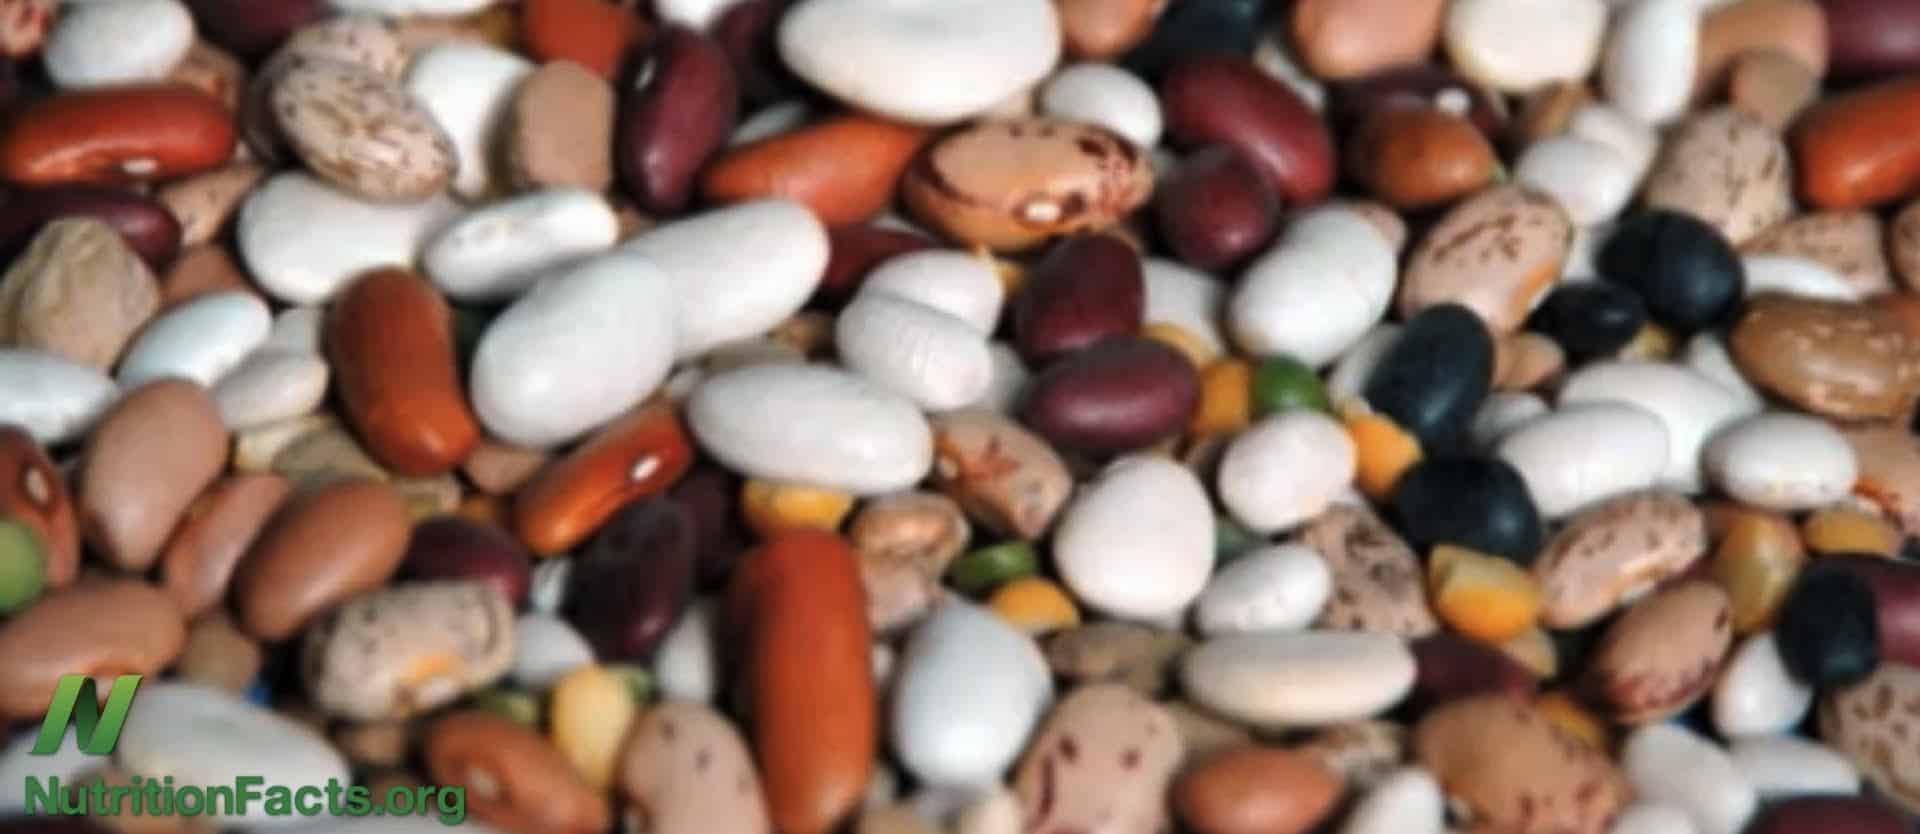 Beans, Beans, Good for Your Heart